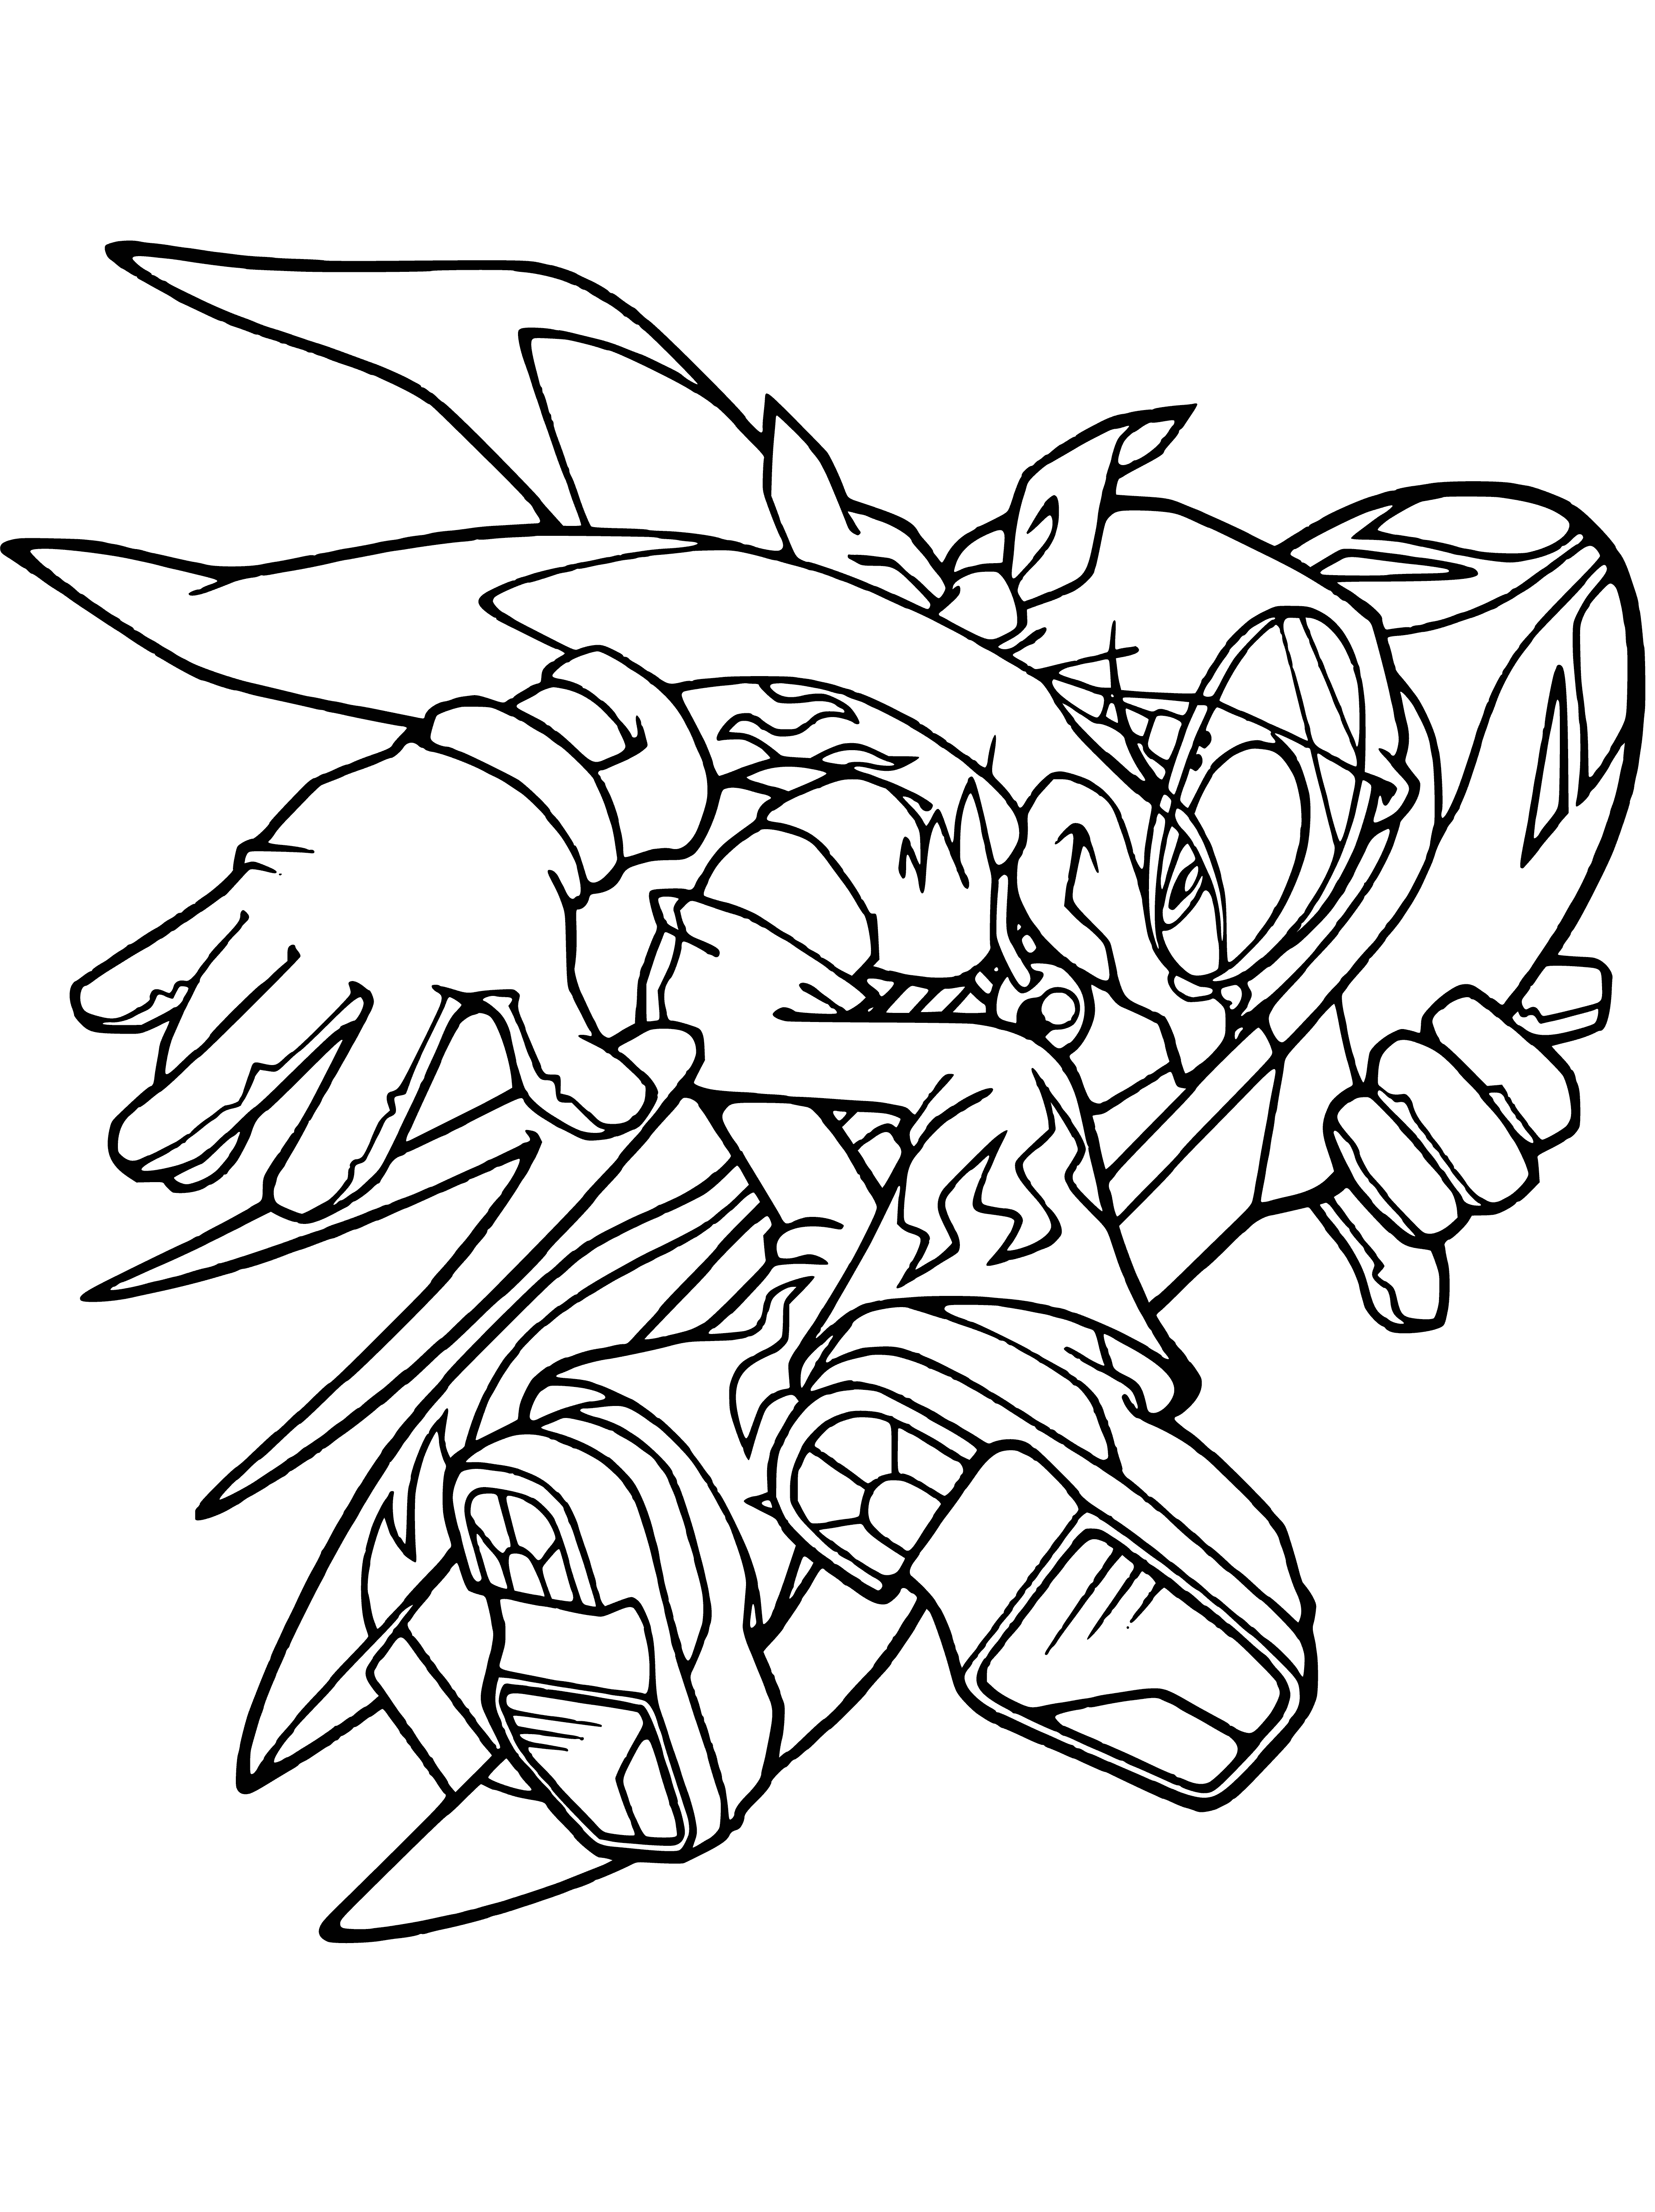 Wave, Wave coloring page